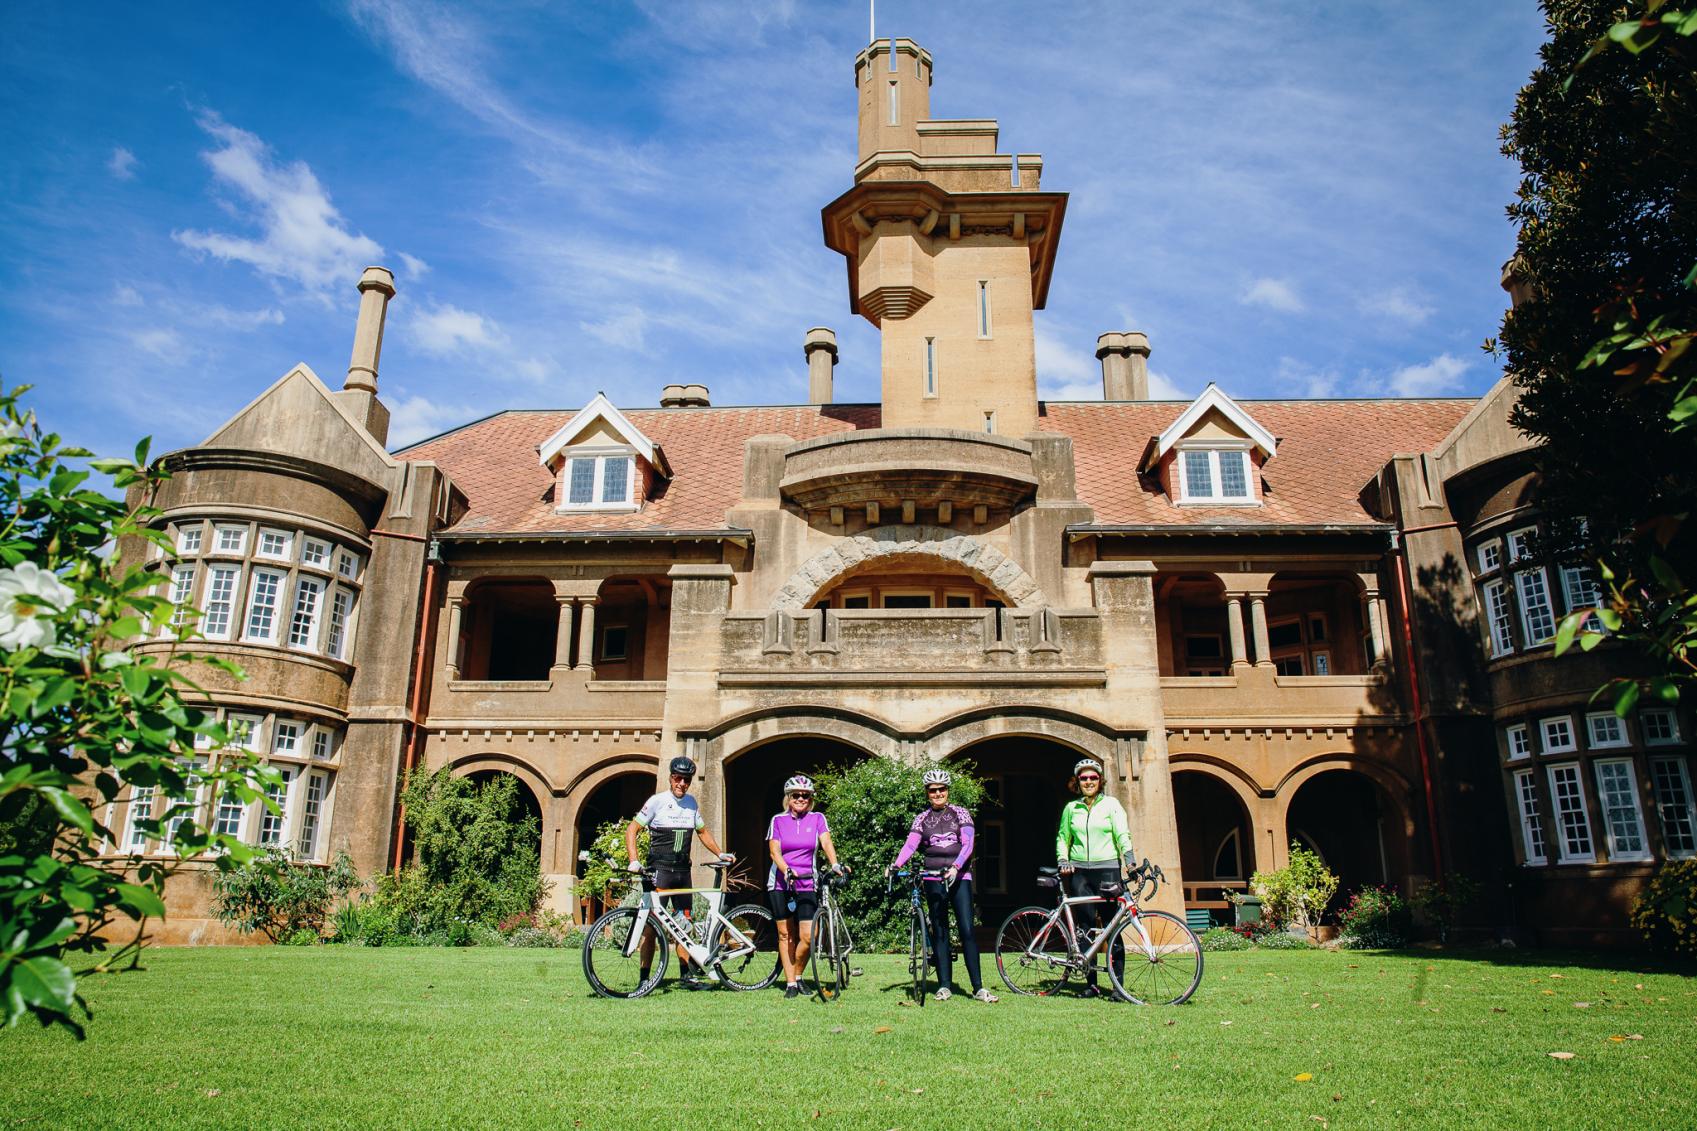 Locals gathered for a bike ride at Iandra Castle in Weddin Shire NSW